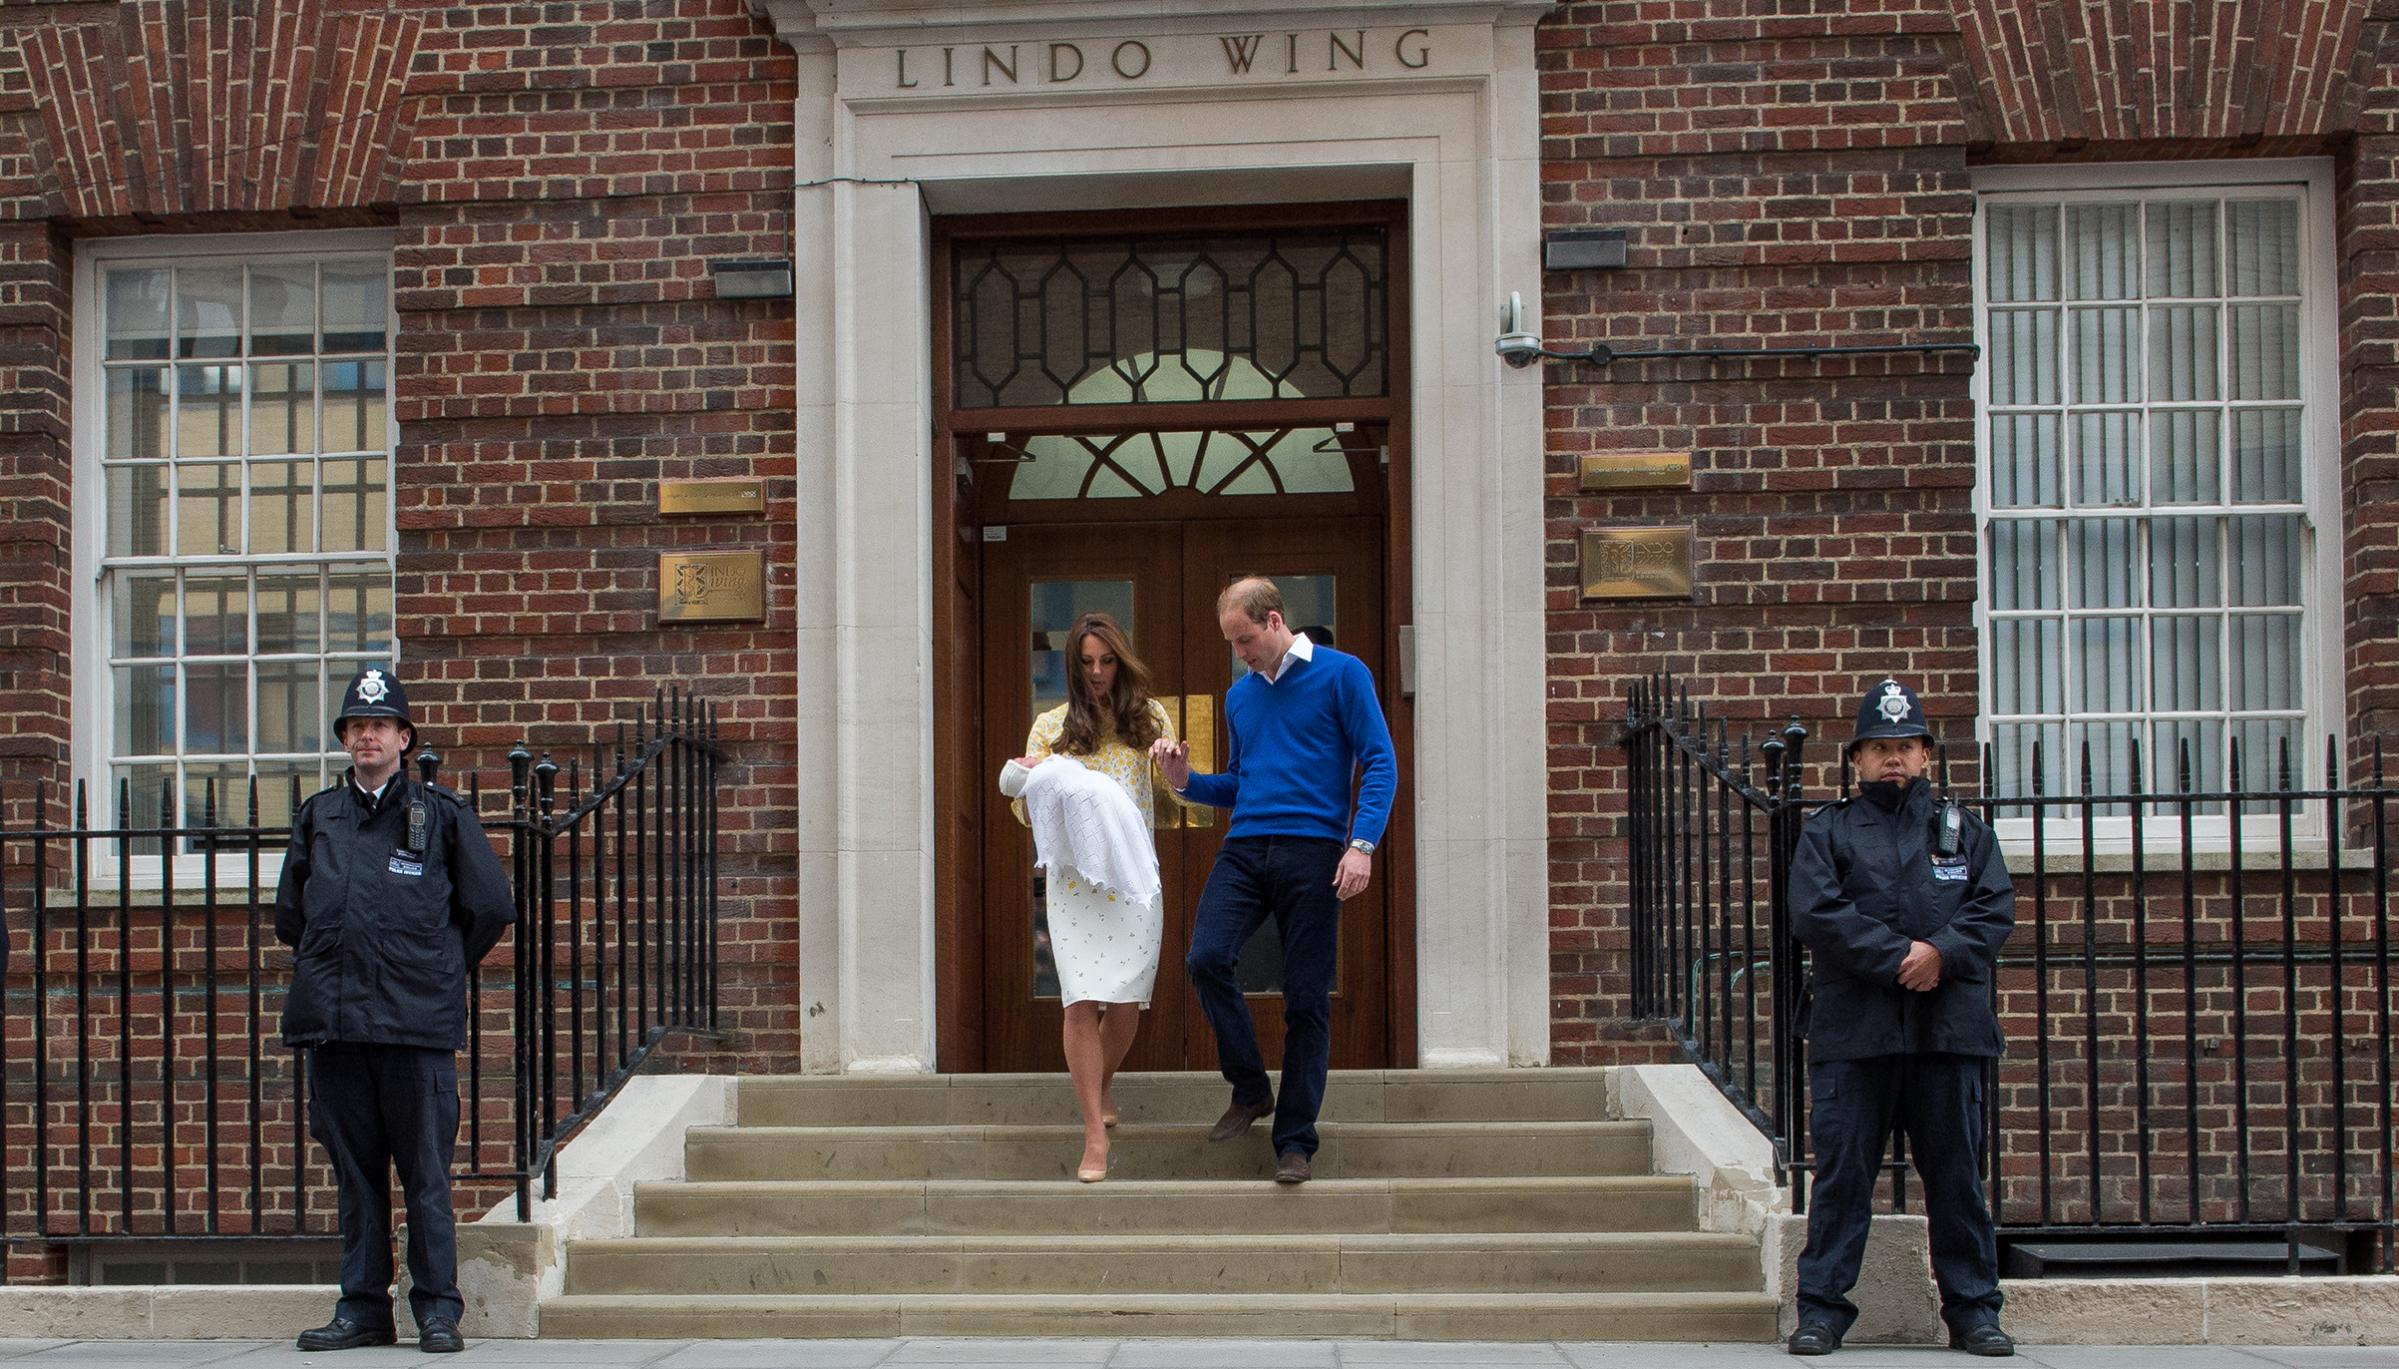 Prince William, Duke of Cambridge, and Catherine, Duchess of Cambridge, depart the Lindo Wing with their newborn baby daughter at St. Mary's Hospital in London on May 2, 2015.